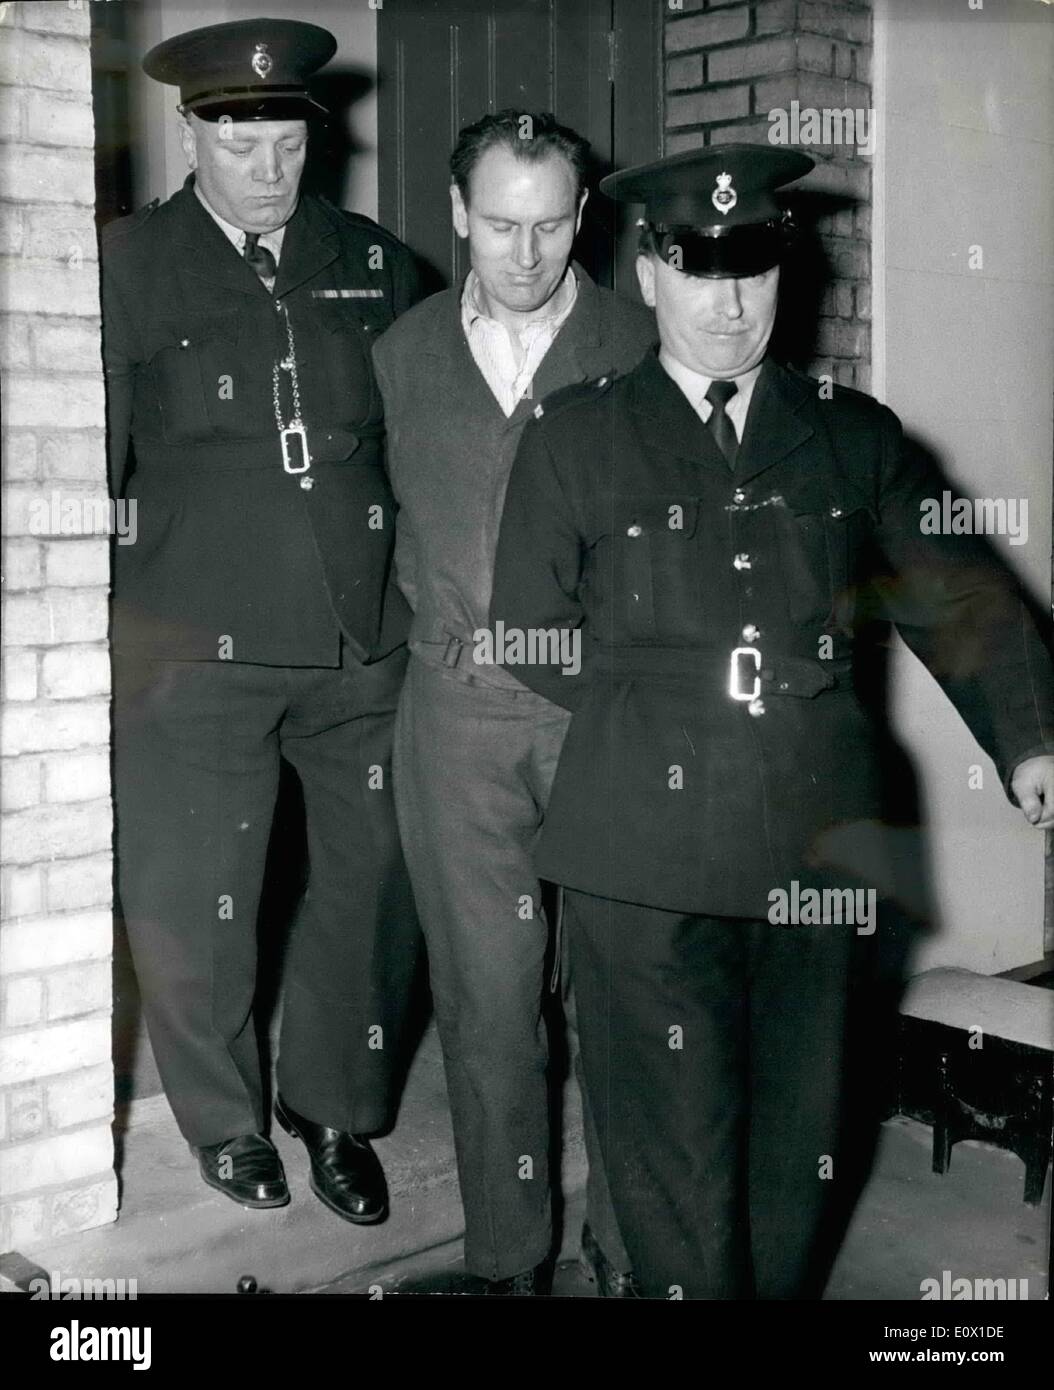 Dec. 12, 1964 - KILLER HUNT ENDS ON THE GUILDFORD BY-PASS.. FREDERICK SMITH the Babes-in-the-Wood killer who eitikild-Frum-Waiiiiood Sorubbs on Monday was recaptured last night as he pushed a stolen bioitcle along the Guildford By-Pass in Surrey less than a quarter of a mile from the soone of his orime - seventeen years ago. Baok in 1947 Smith murdered tenon year old Eileen Gaff in tenor Woods, Guildford - and was sentenced to death and reprieved. The charge of murdering her brother nine year old LESLIE stayed on the files.. Smith has been reueiving psyohiatrio treatment in prison Stock Photo